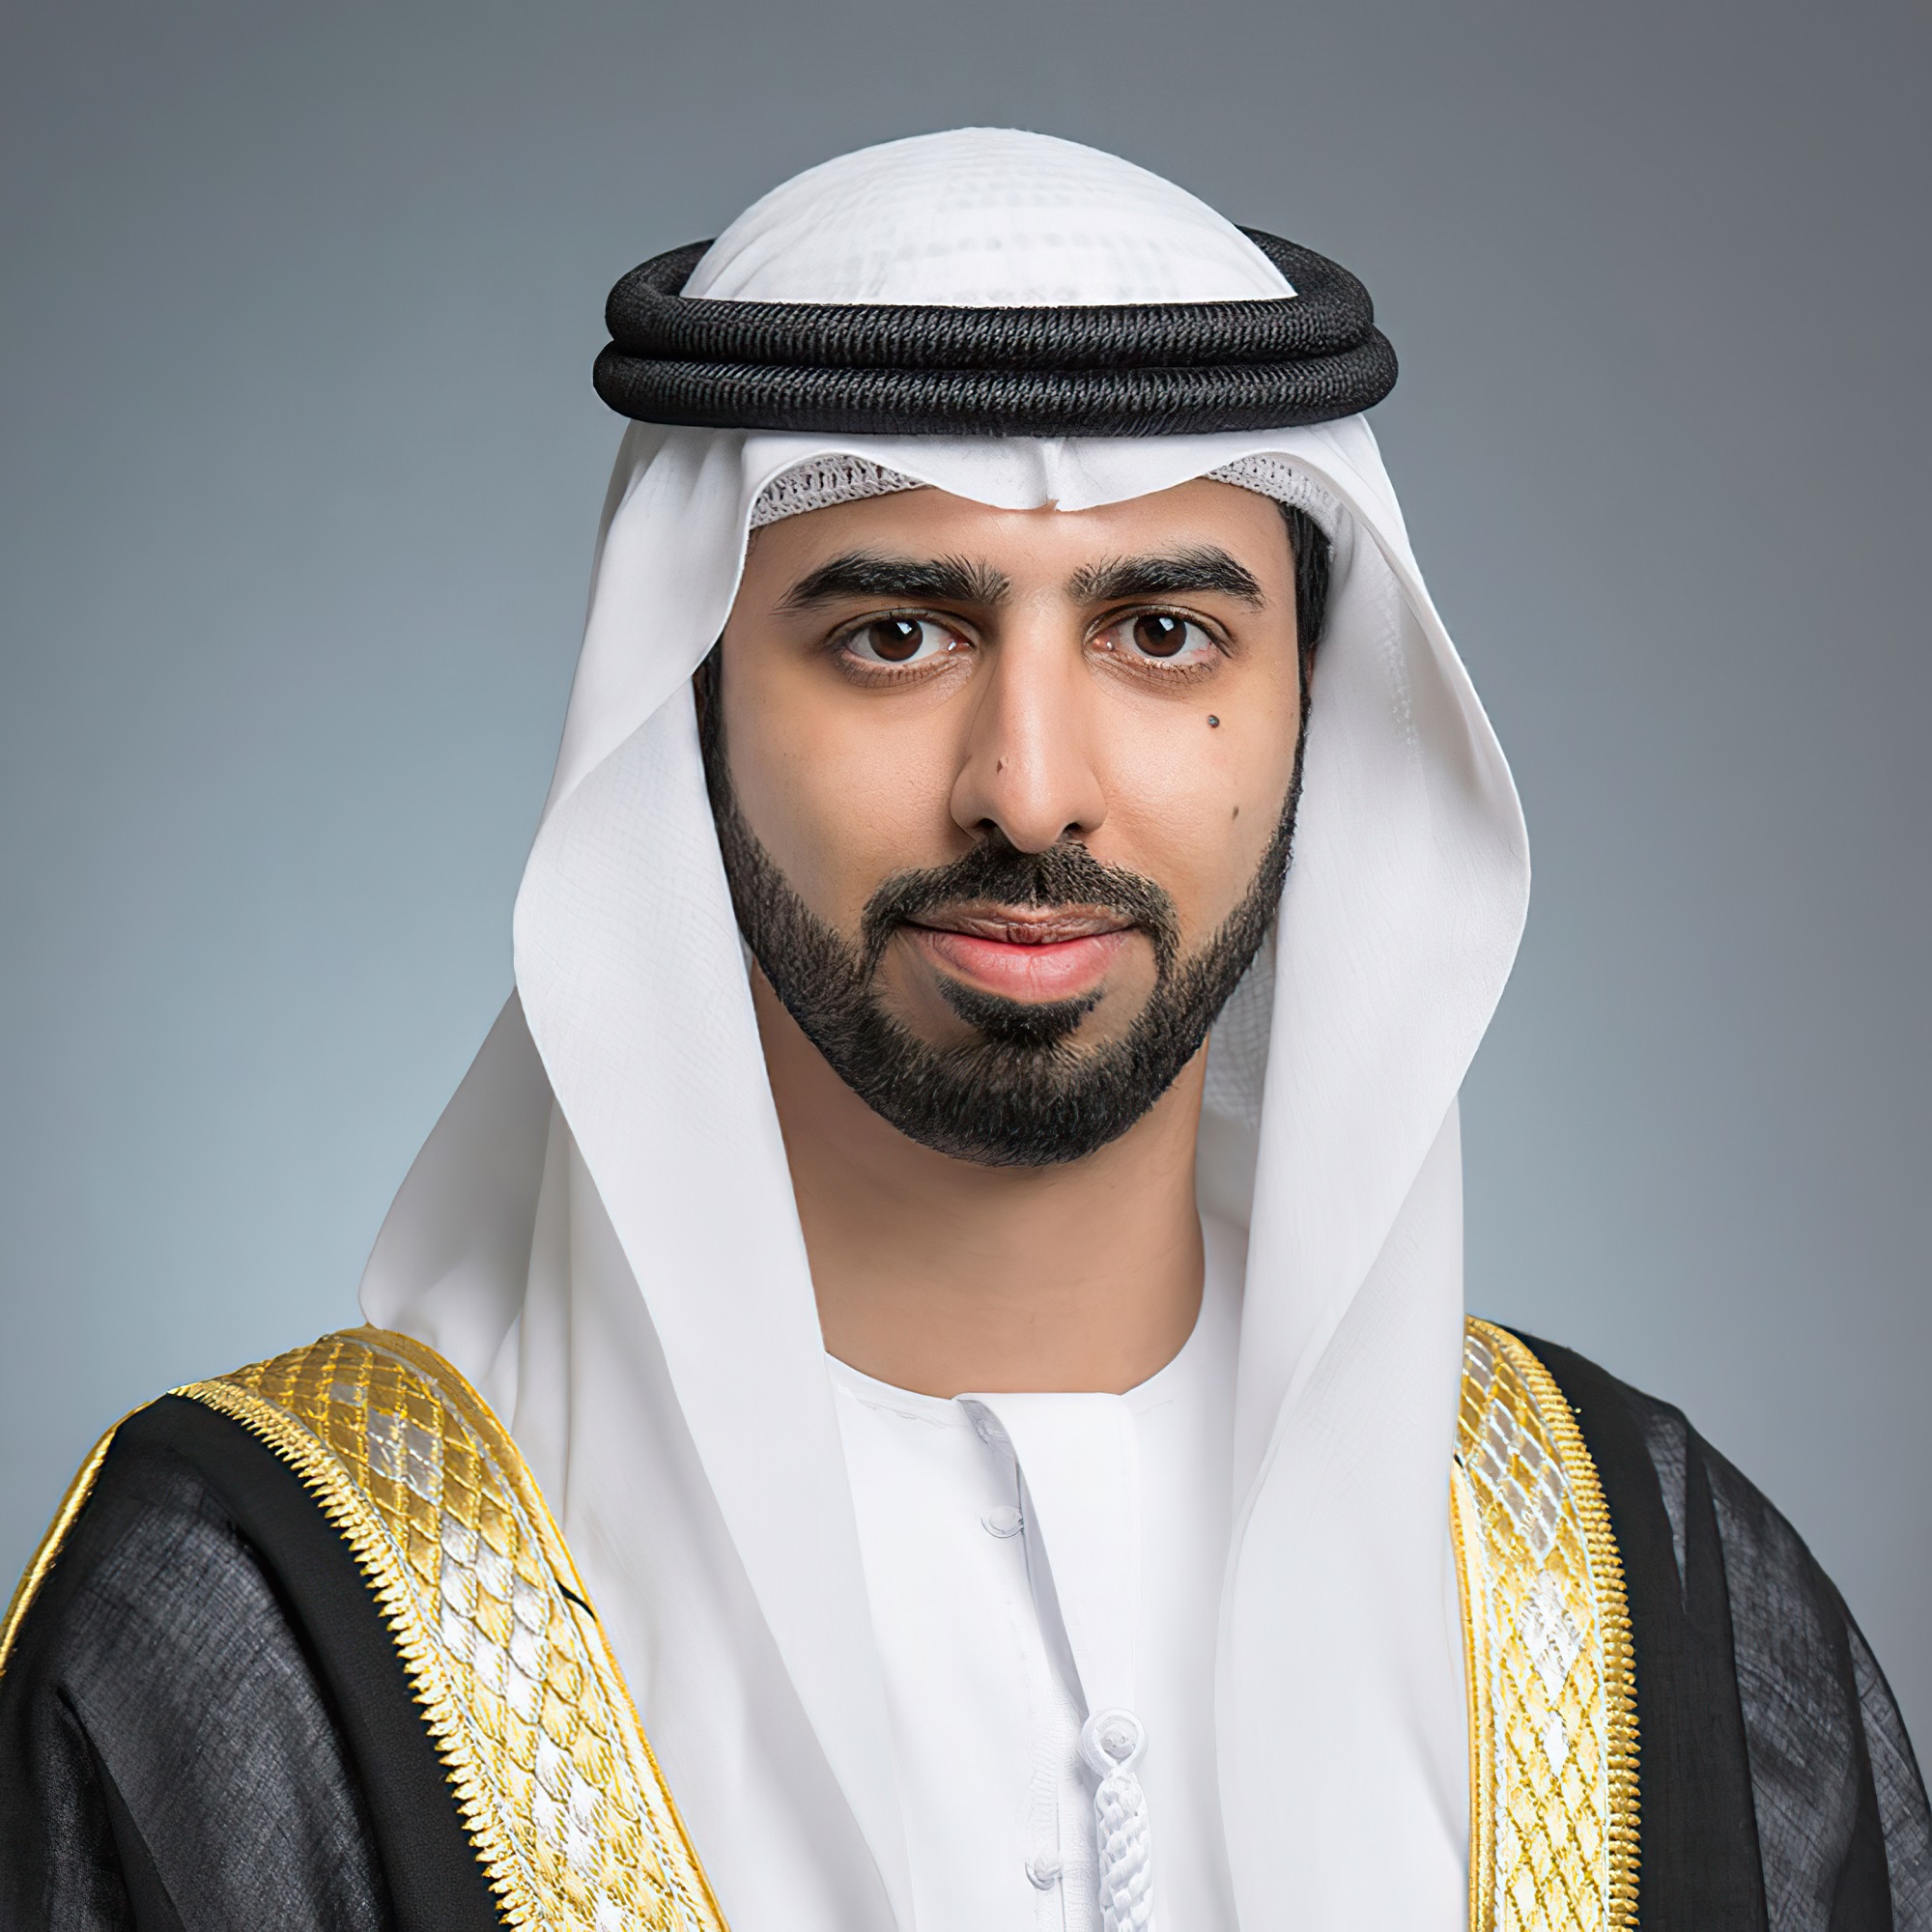 Dubai Chamber of Commerce in collaboration with Dubai Chamber of Digital Economy launches six digital business groups